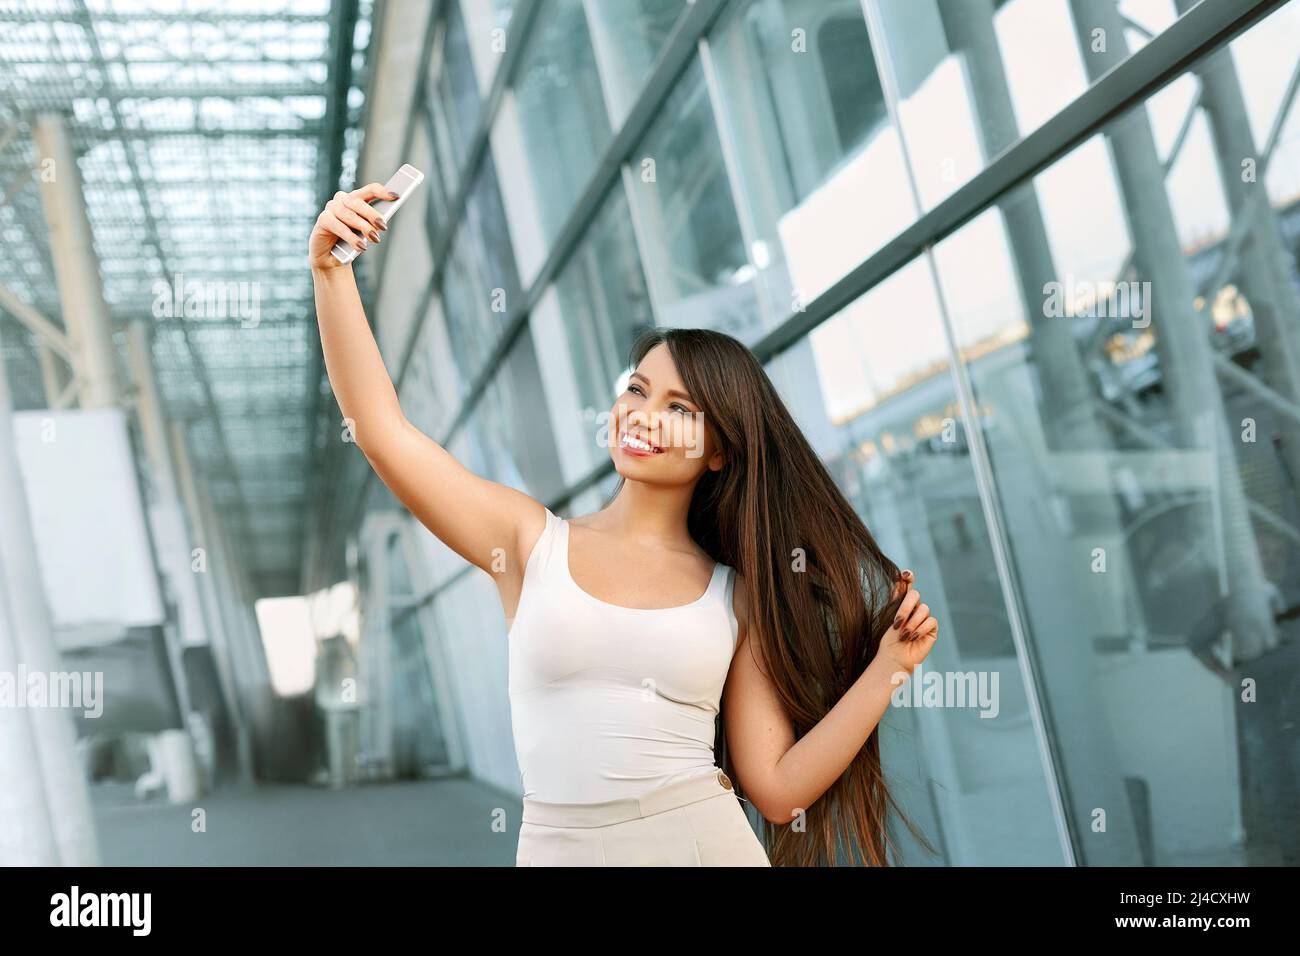 Happy young woman taking selfie. Stock Photo